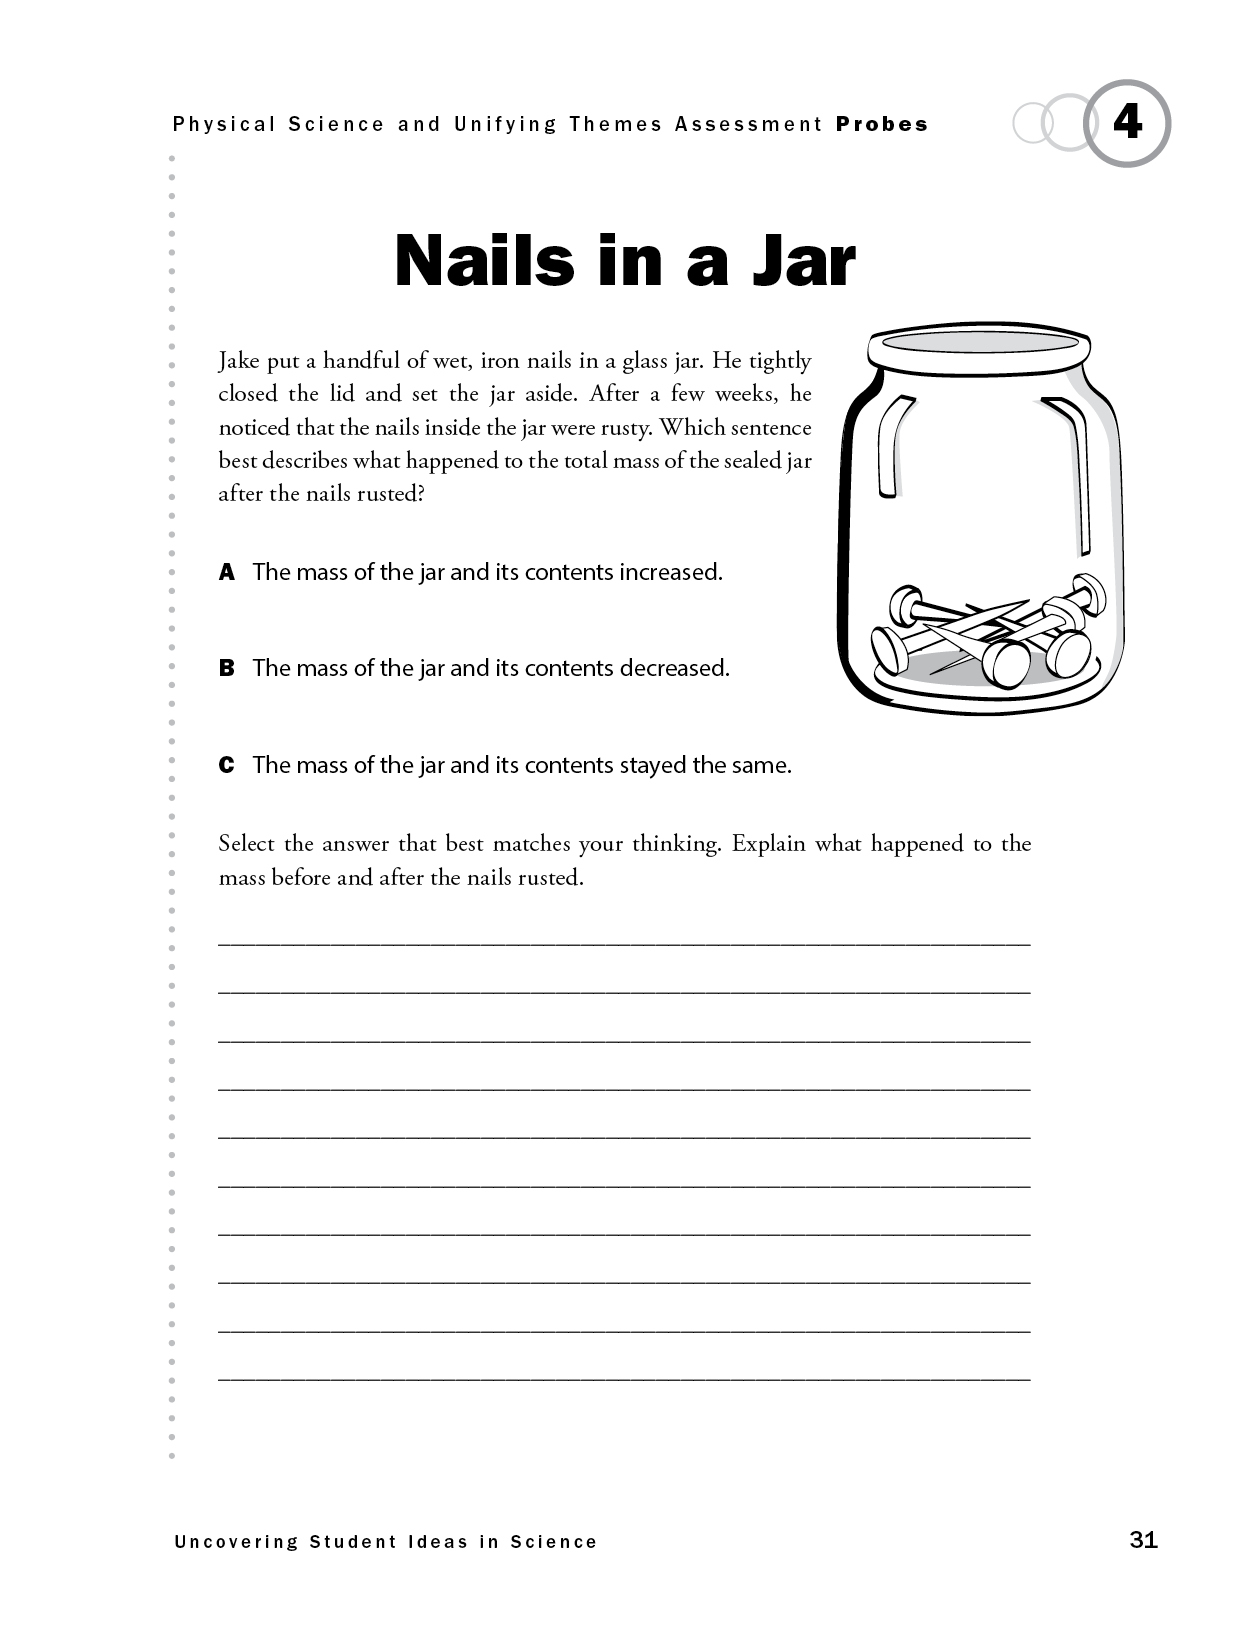 Nails in a Jar